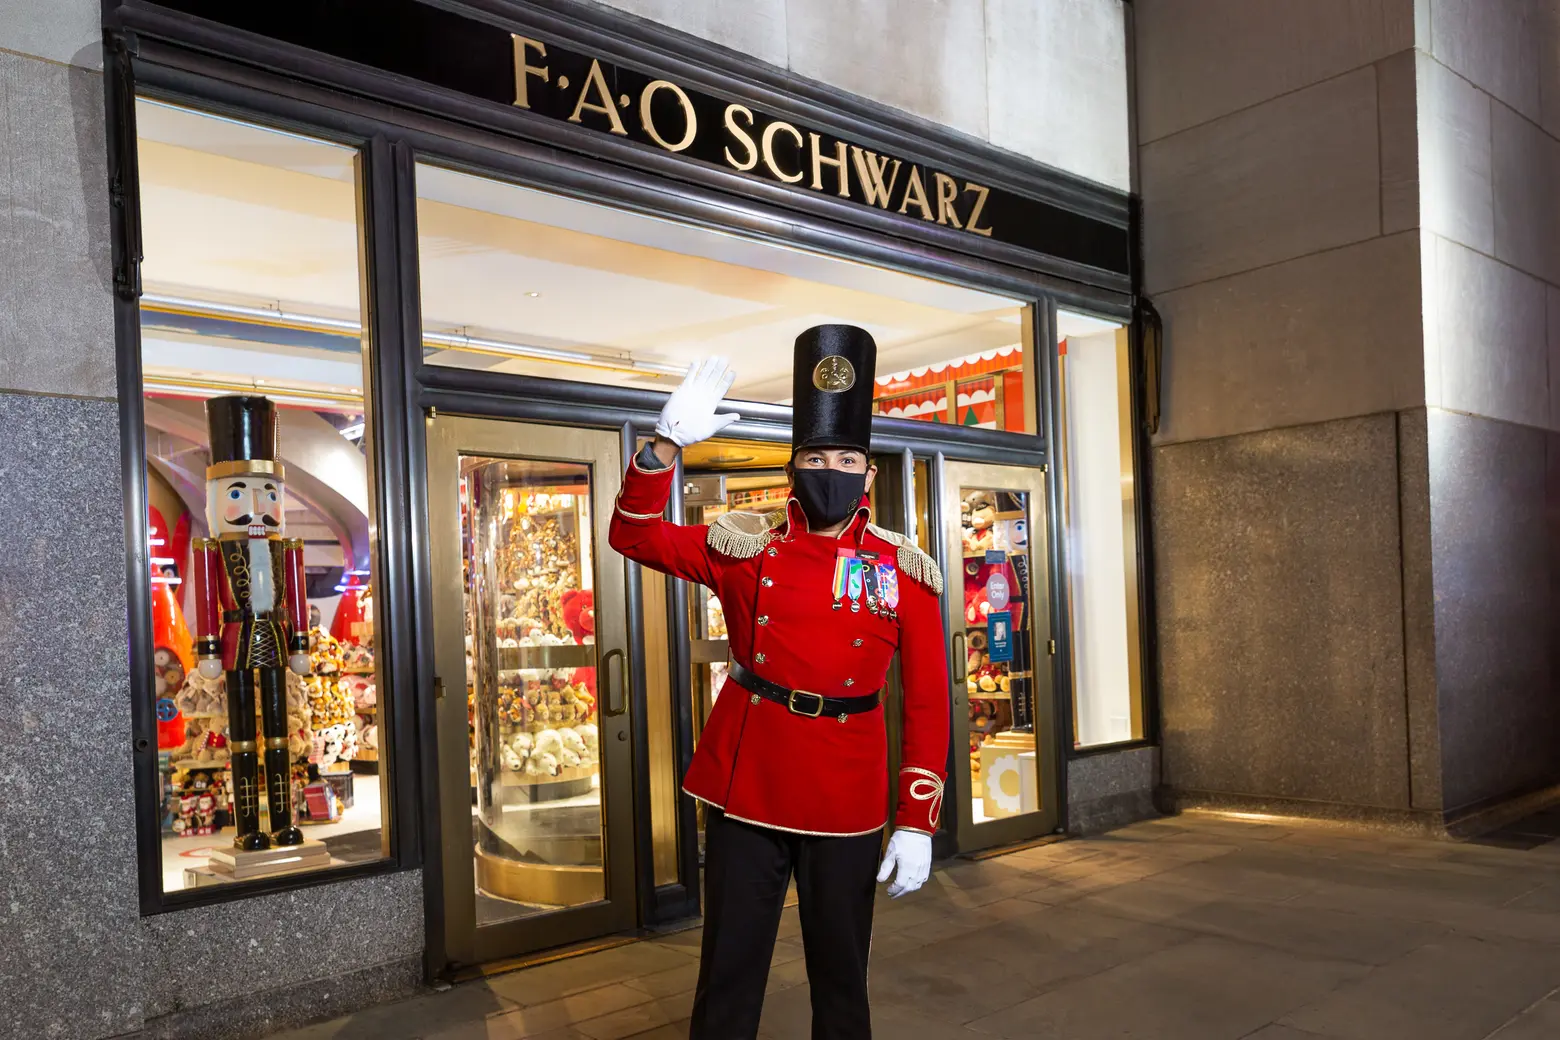 FAO Schwarz' famous Fifth Avenue location is closing